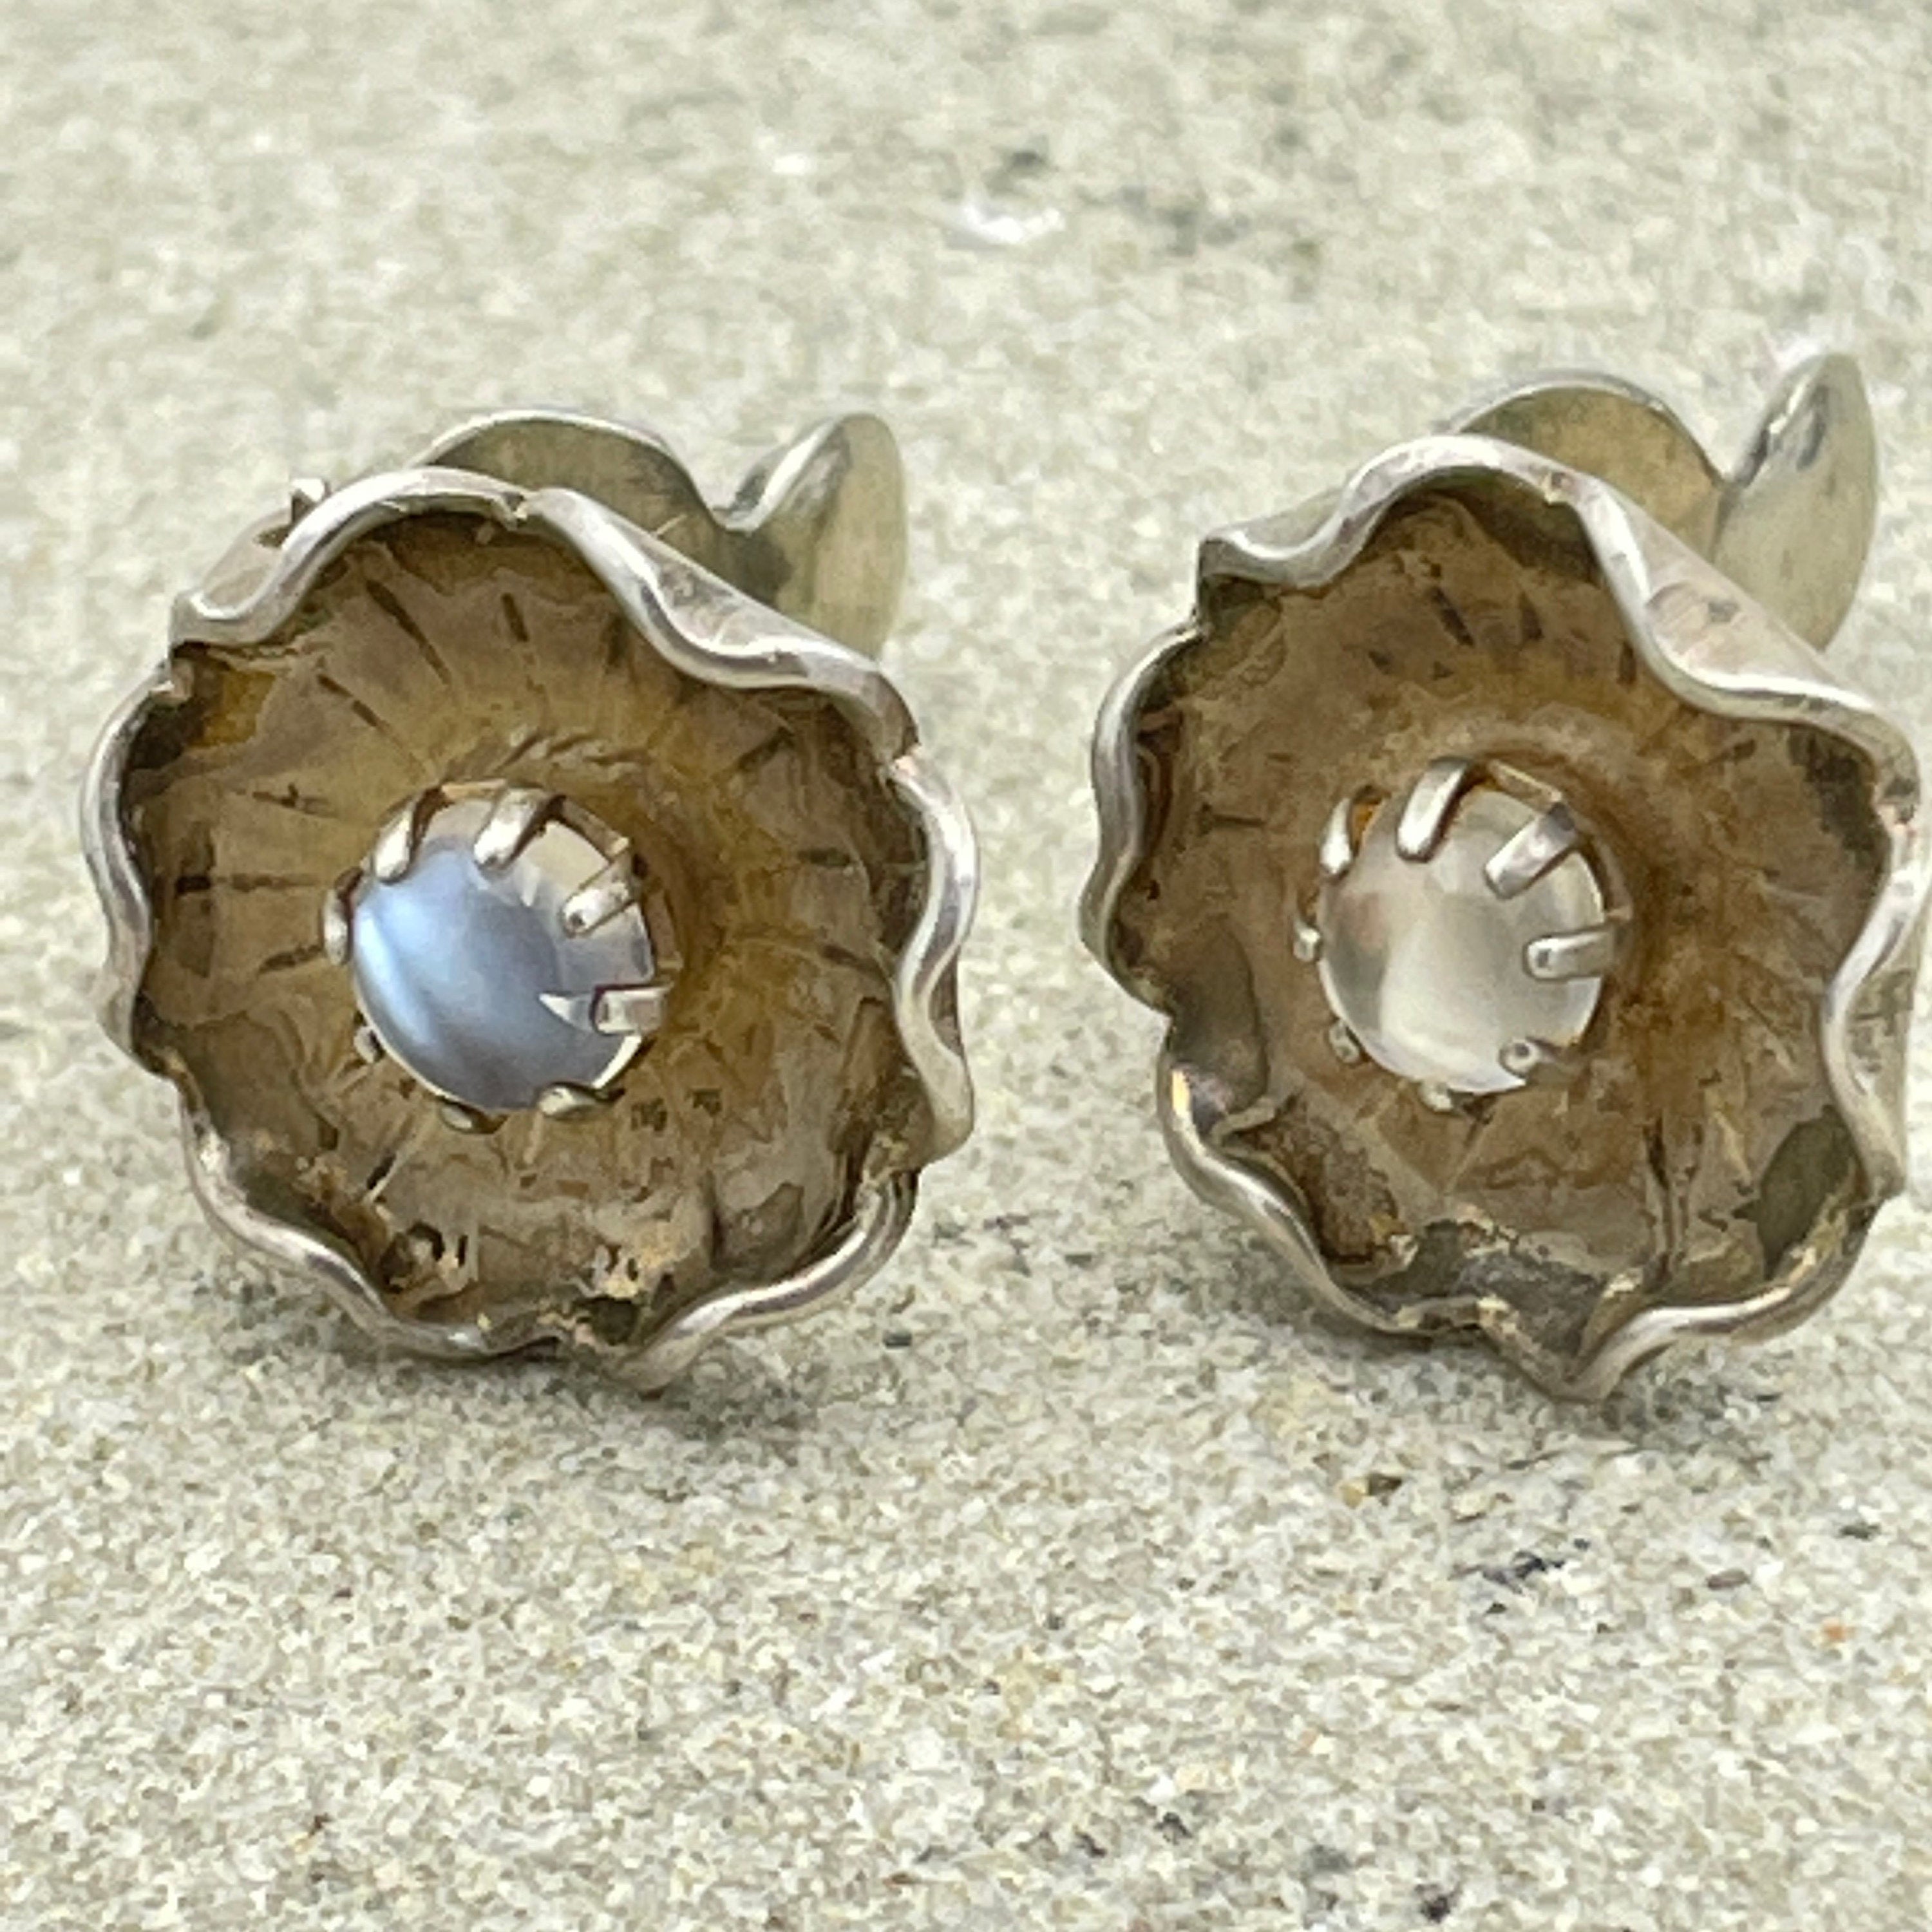 Vintage hand made sterling silver moonstone cabochon flower clip on earrings, mid century c1950s